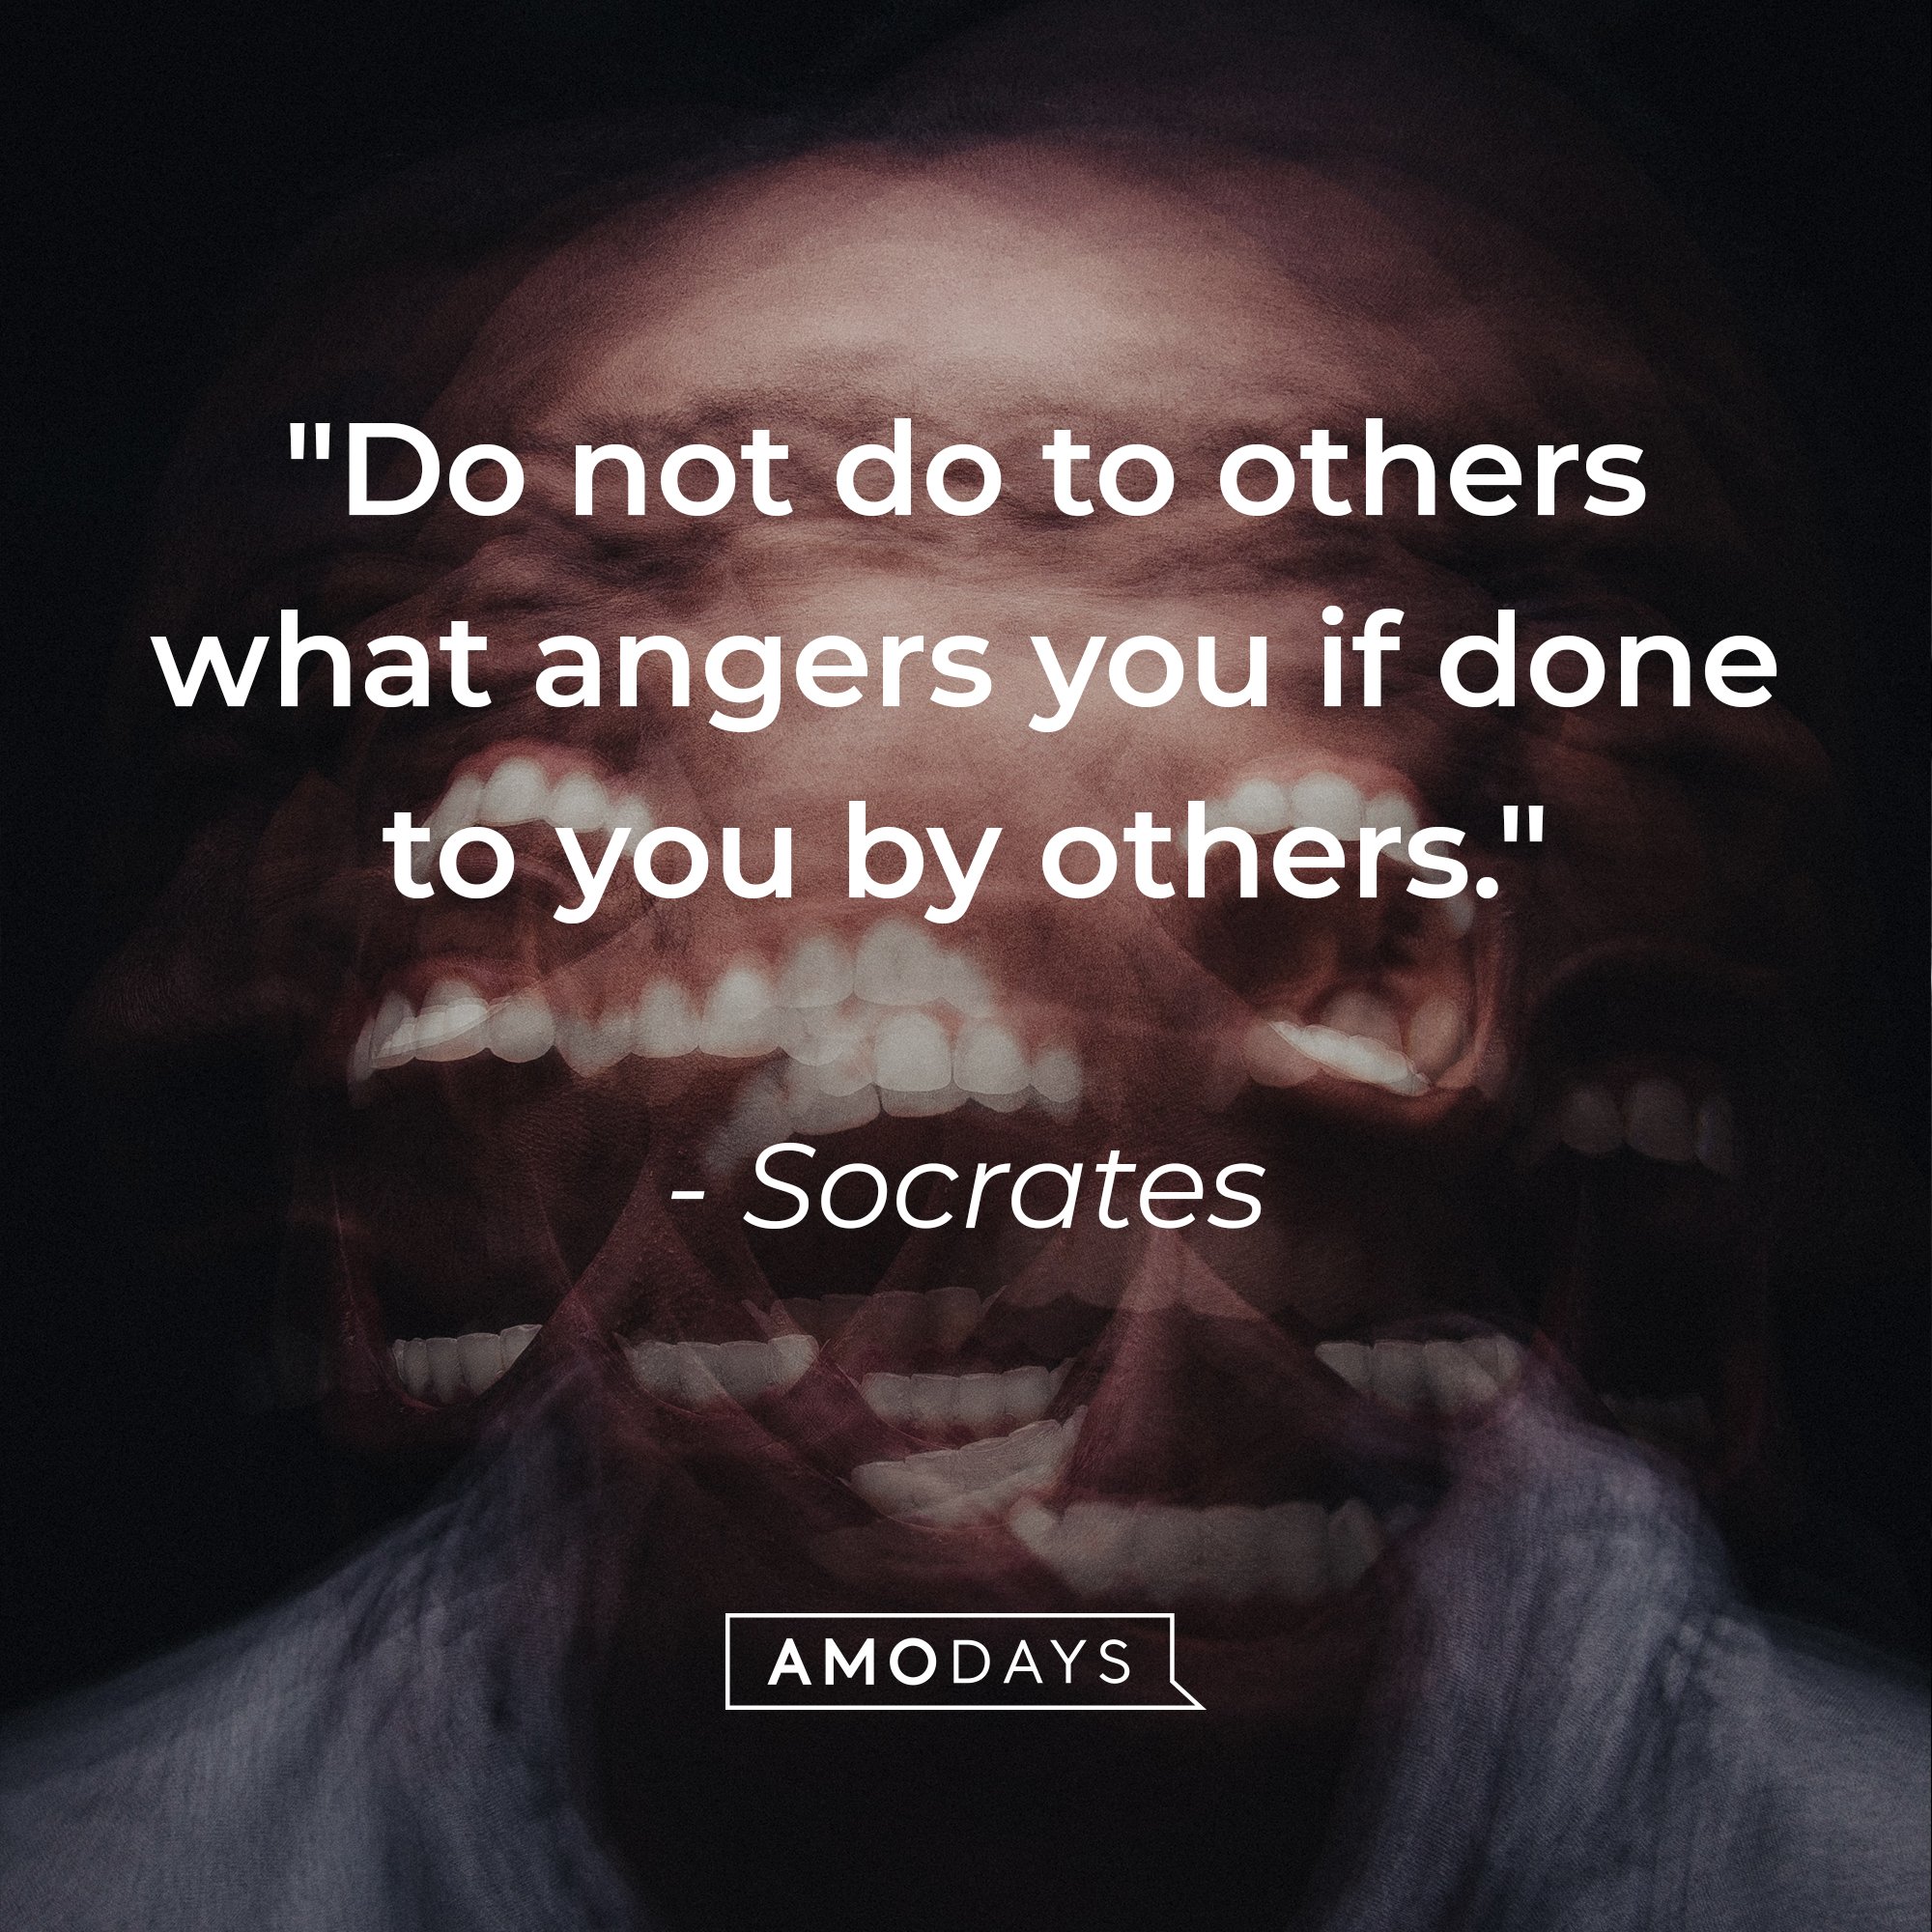 Socrates’ quote: "Do not do to others what angers you if done to you by others." | Image: Amodays  